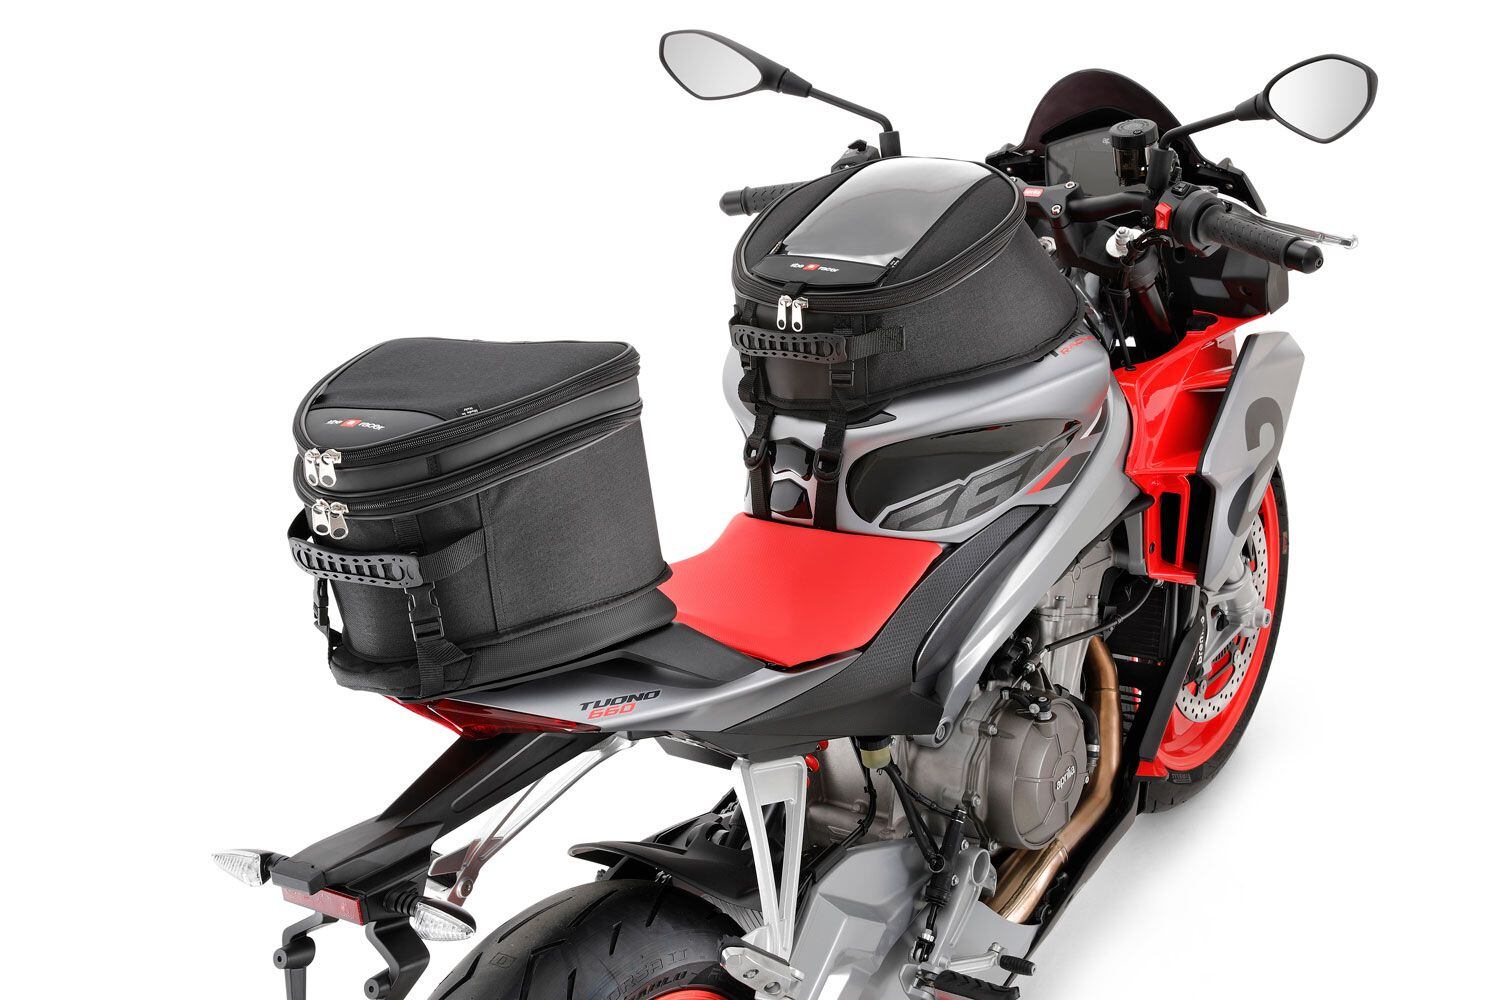 For many of us, Aprilia’s accessory tail pack and tankbag (not to mention cruise control) make touring look like an enticing prospect, even if the Tuono won’t have the last word in wind protection or fuel range.